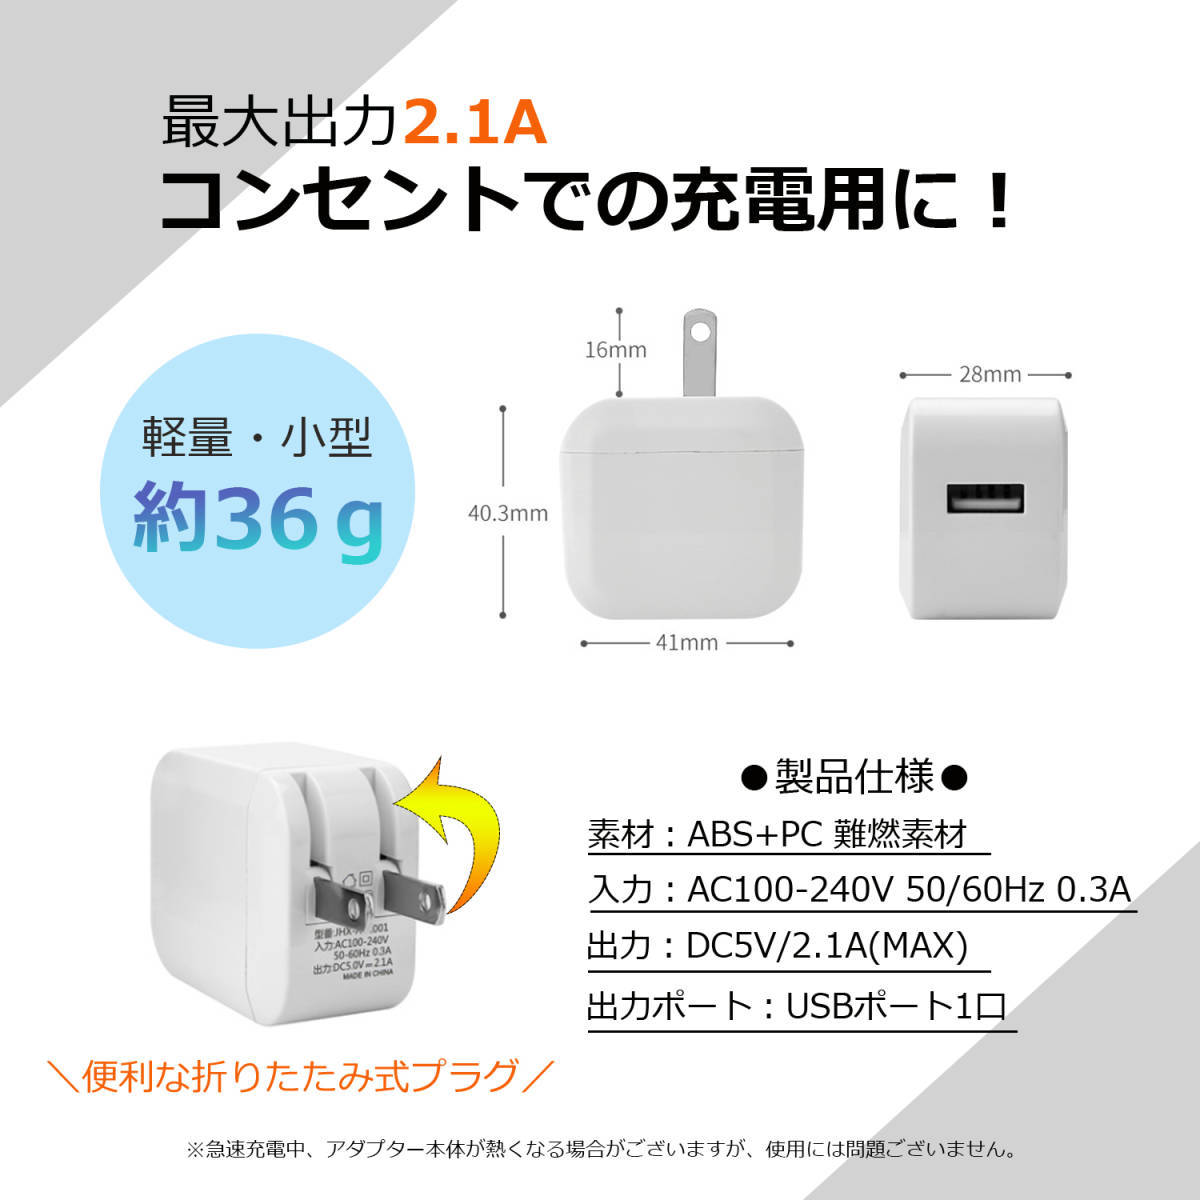 SONY NP-FV100 互換バッテリーと互換充電器2.1A高速Acアダプター付FDR-AX60 FDR-AX700 FDR-AX55 FDR-AX30_画像4